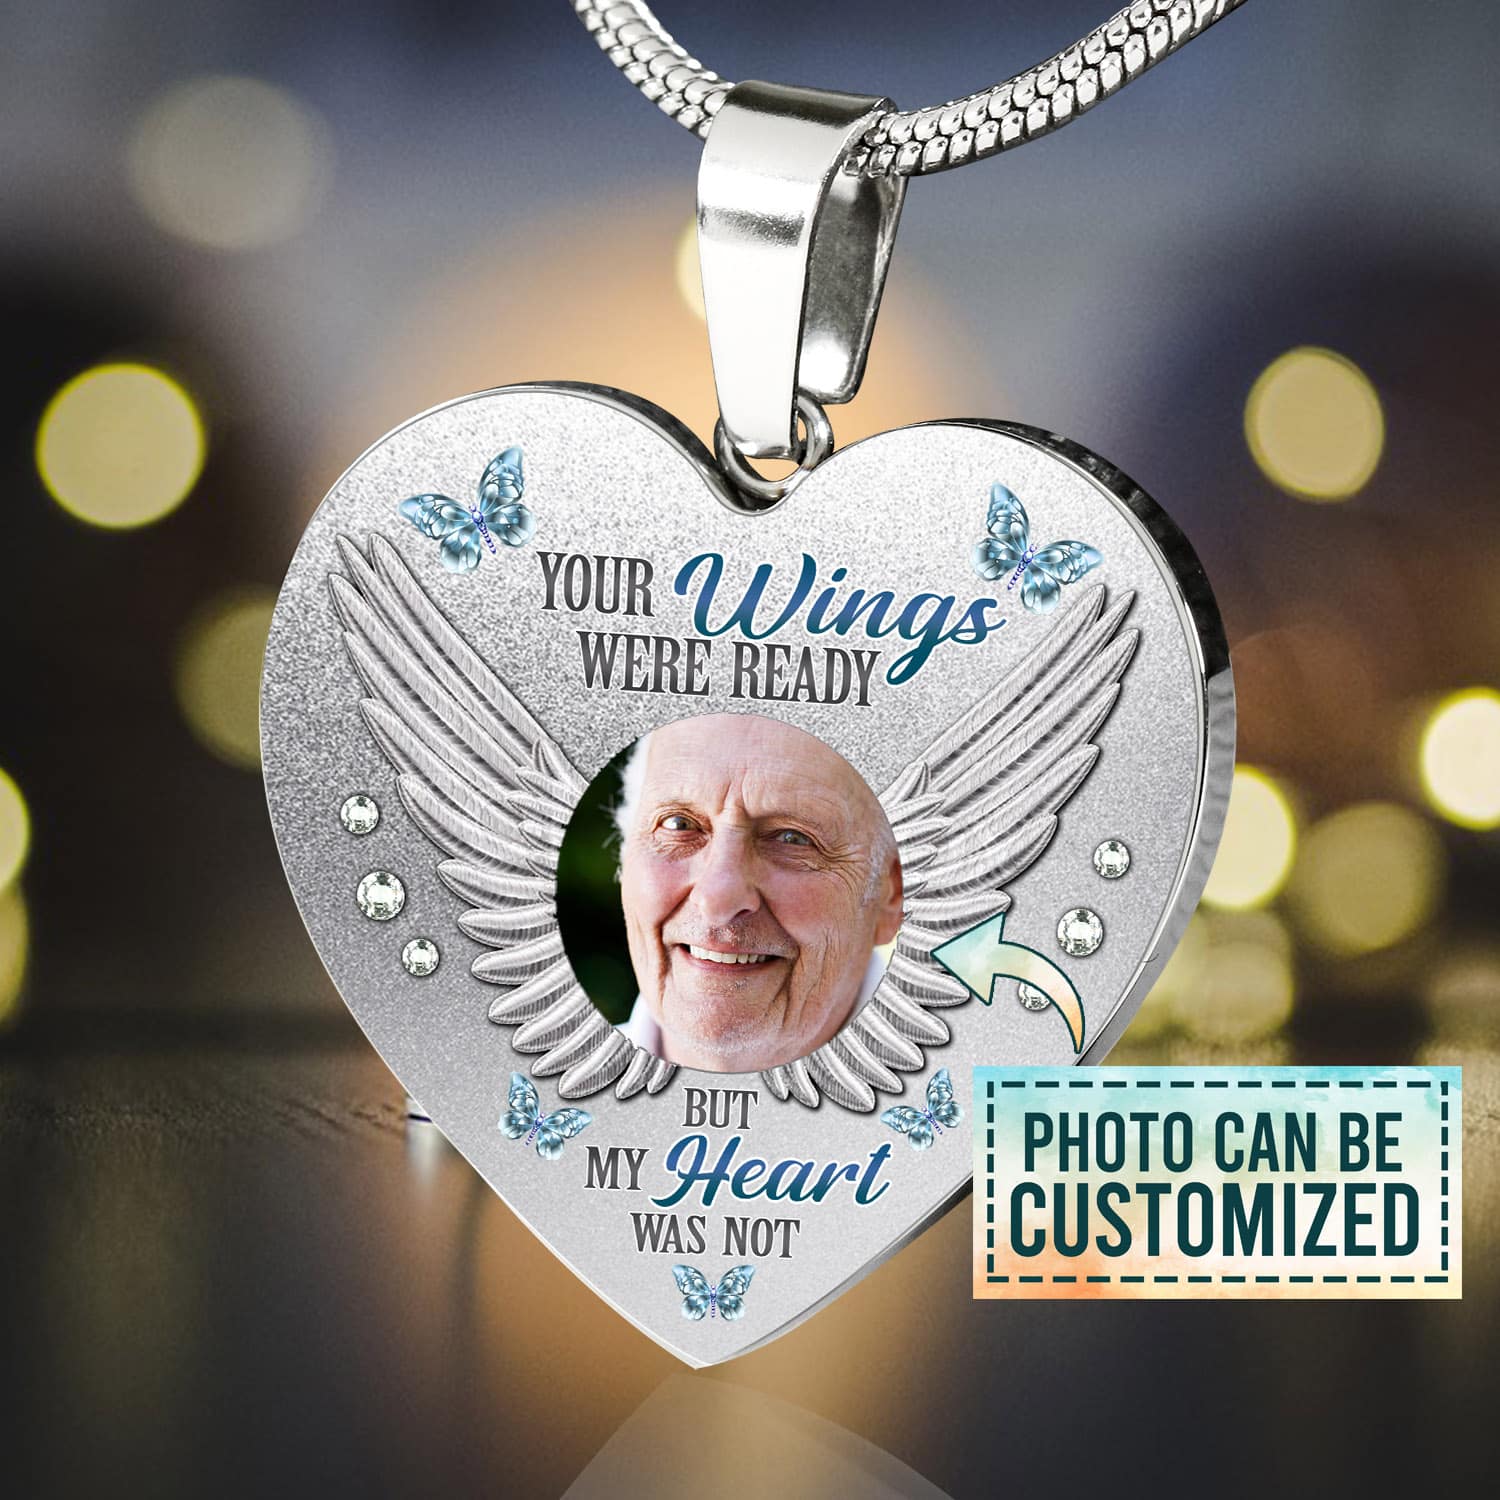 Personalized photo product is always the best choice as memorial gifts.